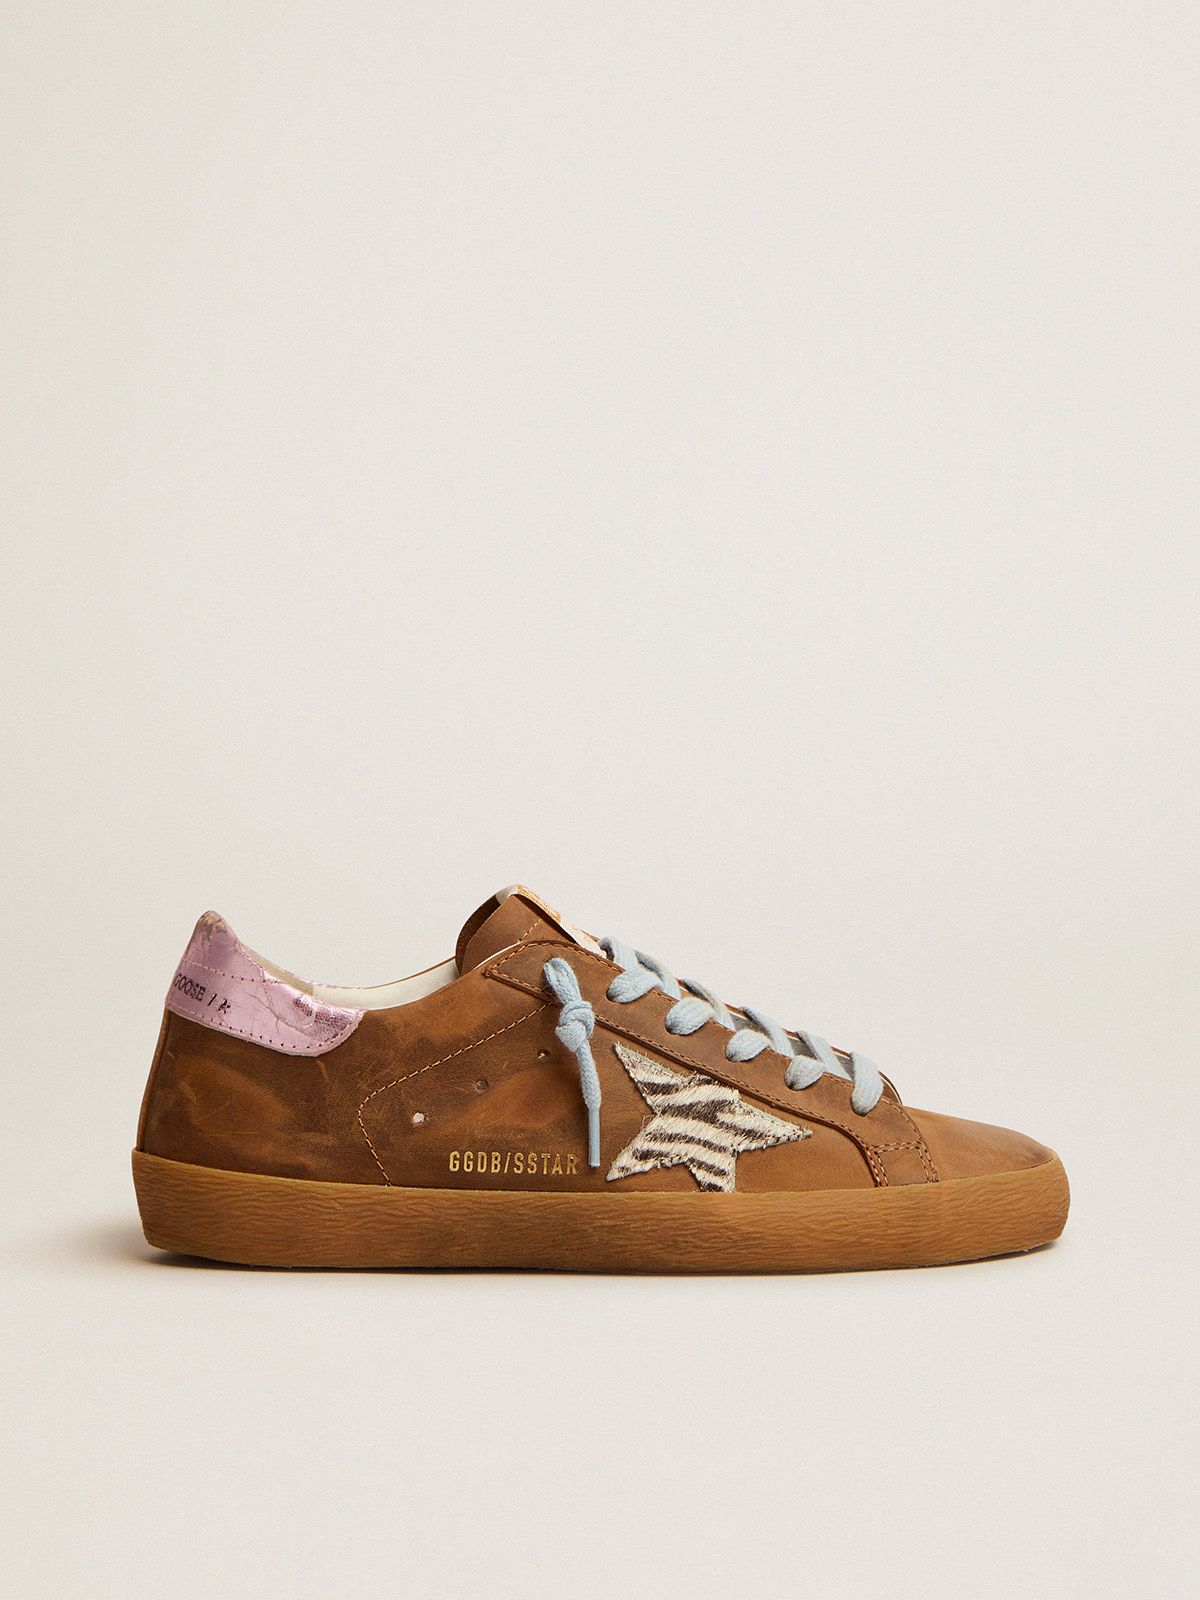 golden goose waxed pony in sneakers a suede brown zebra-print skin star with Super-Star